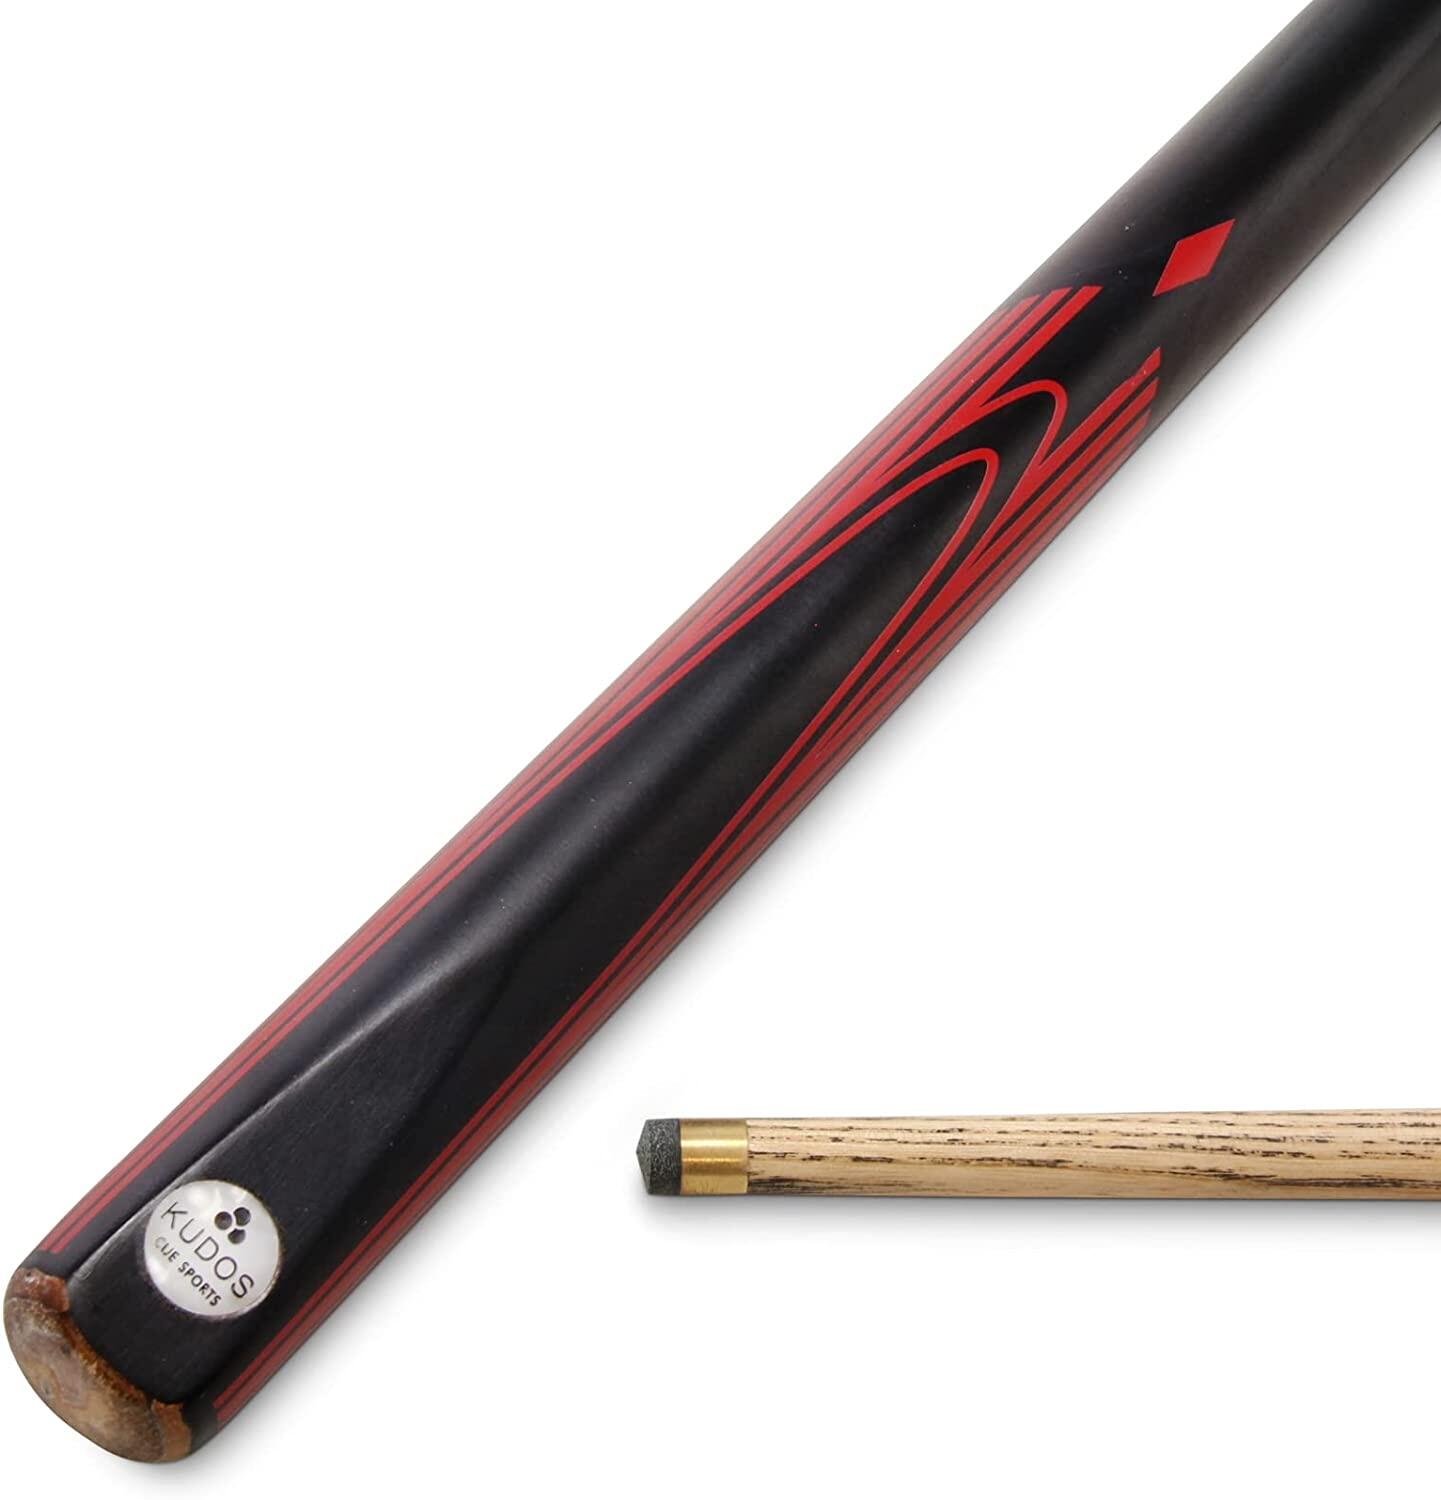 FUNKY CHALK Kudos RED DIAMOND 2pc Matching Ash Grain Snooker Pool Cue 57 Inch - 9.5mm Tip S